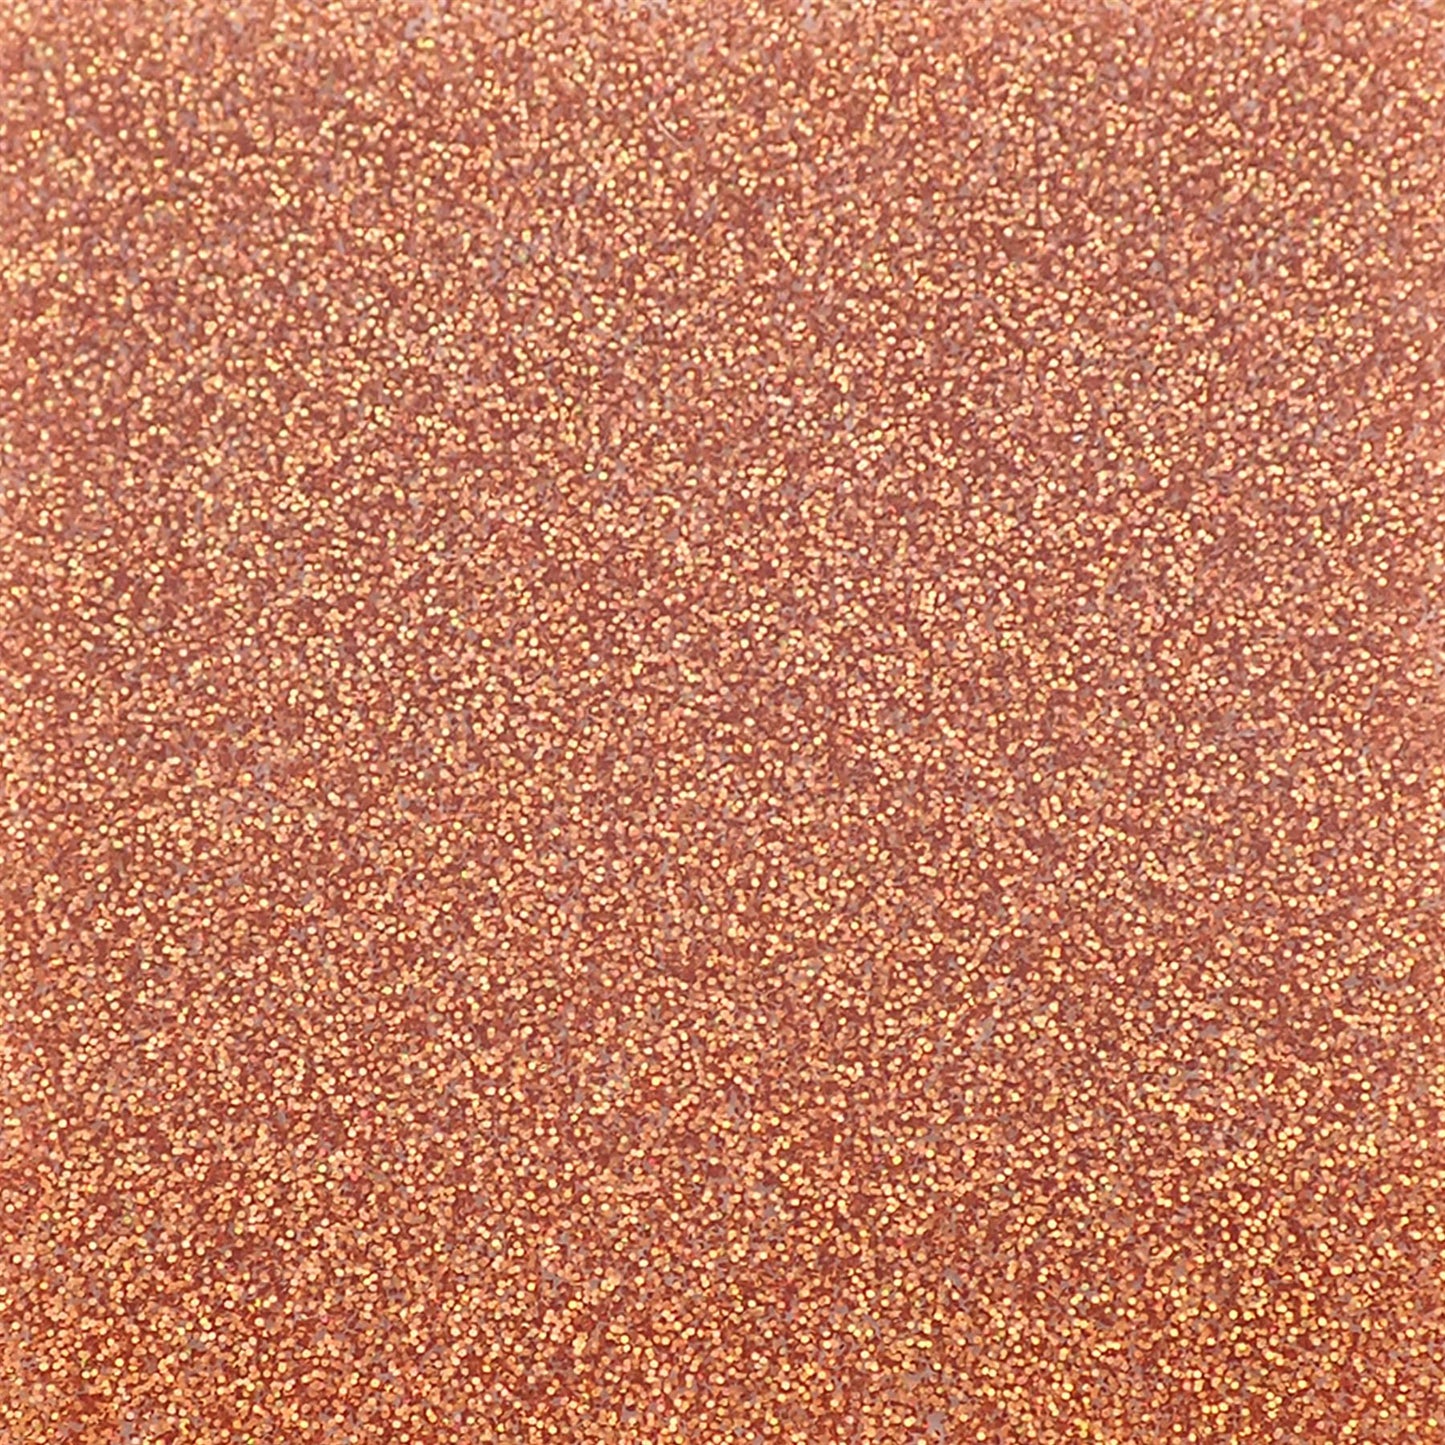 Incudo Copper 2-Sided Holographic Glitter Acrylic Sheet - 98x98x3mm (3.9x3.86x0.12"), Sample